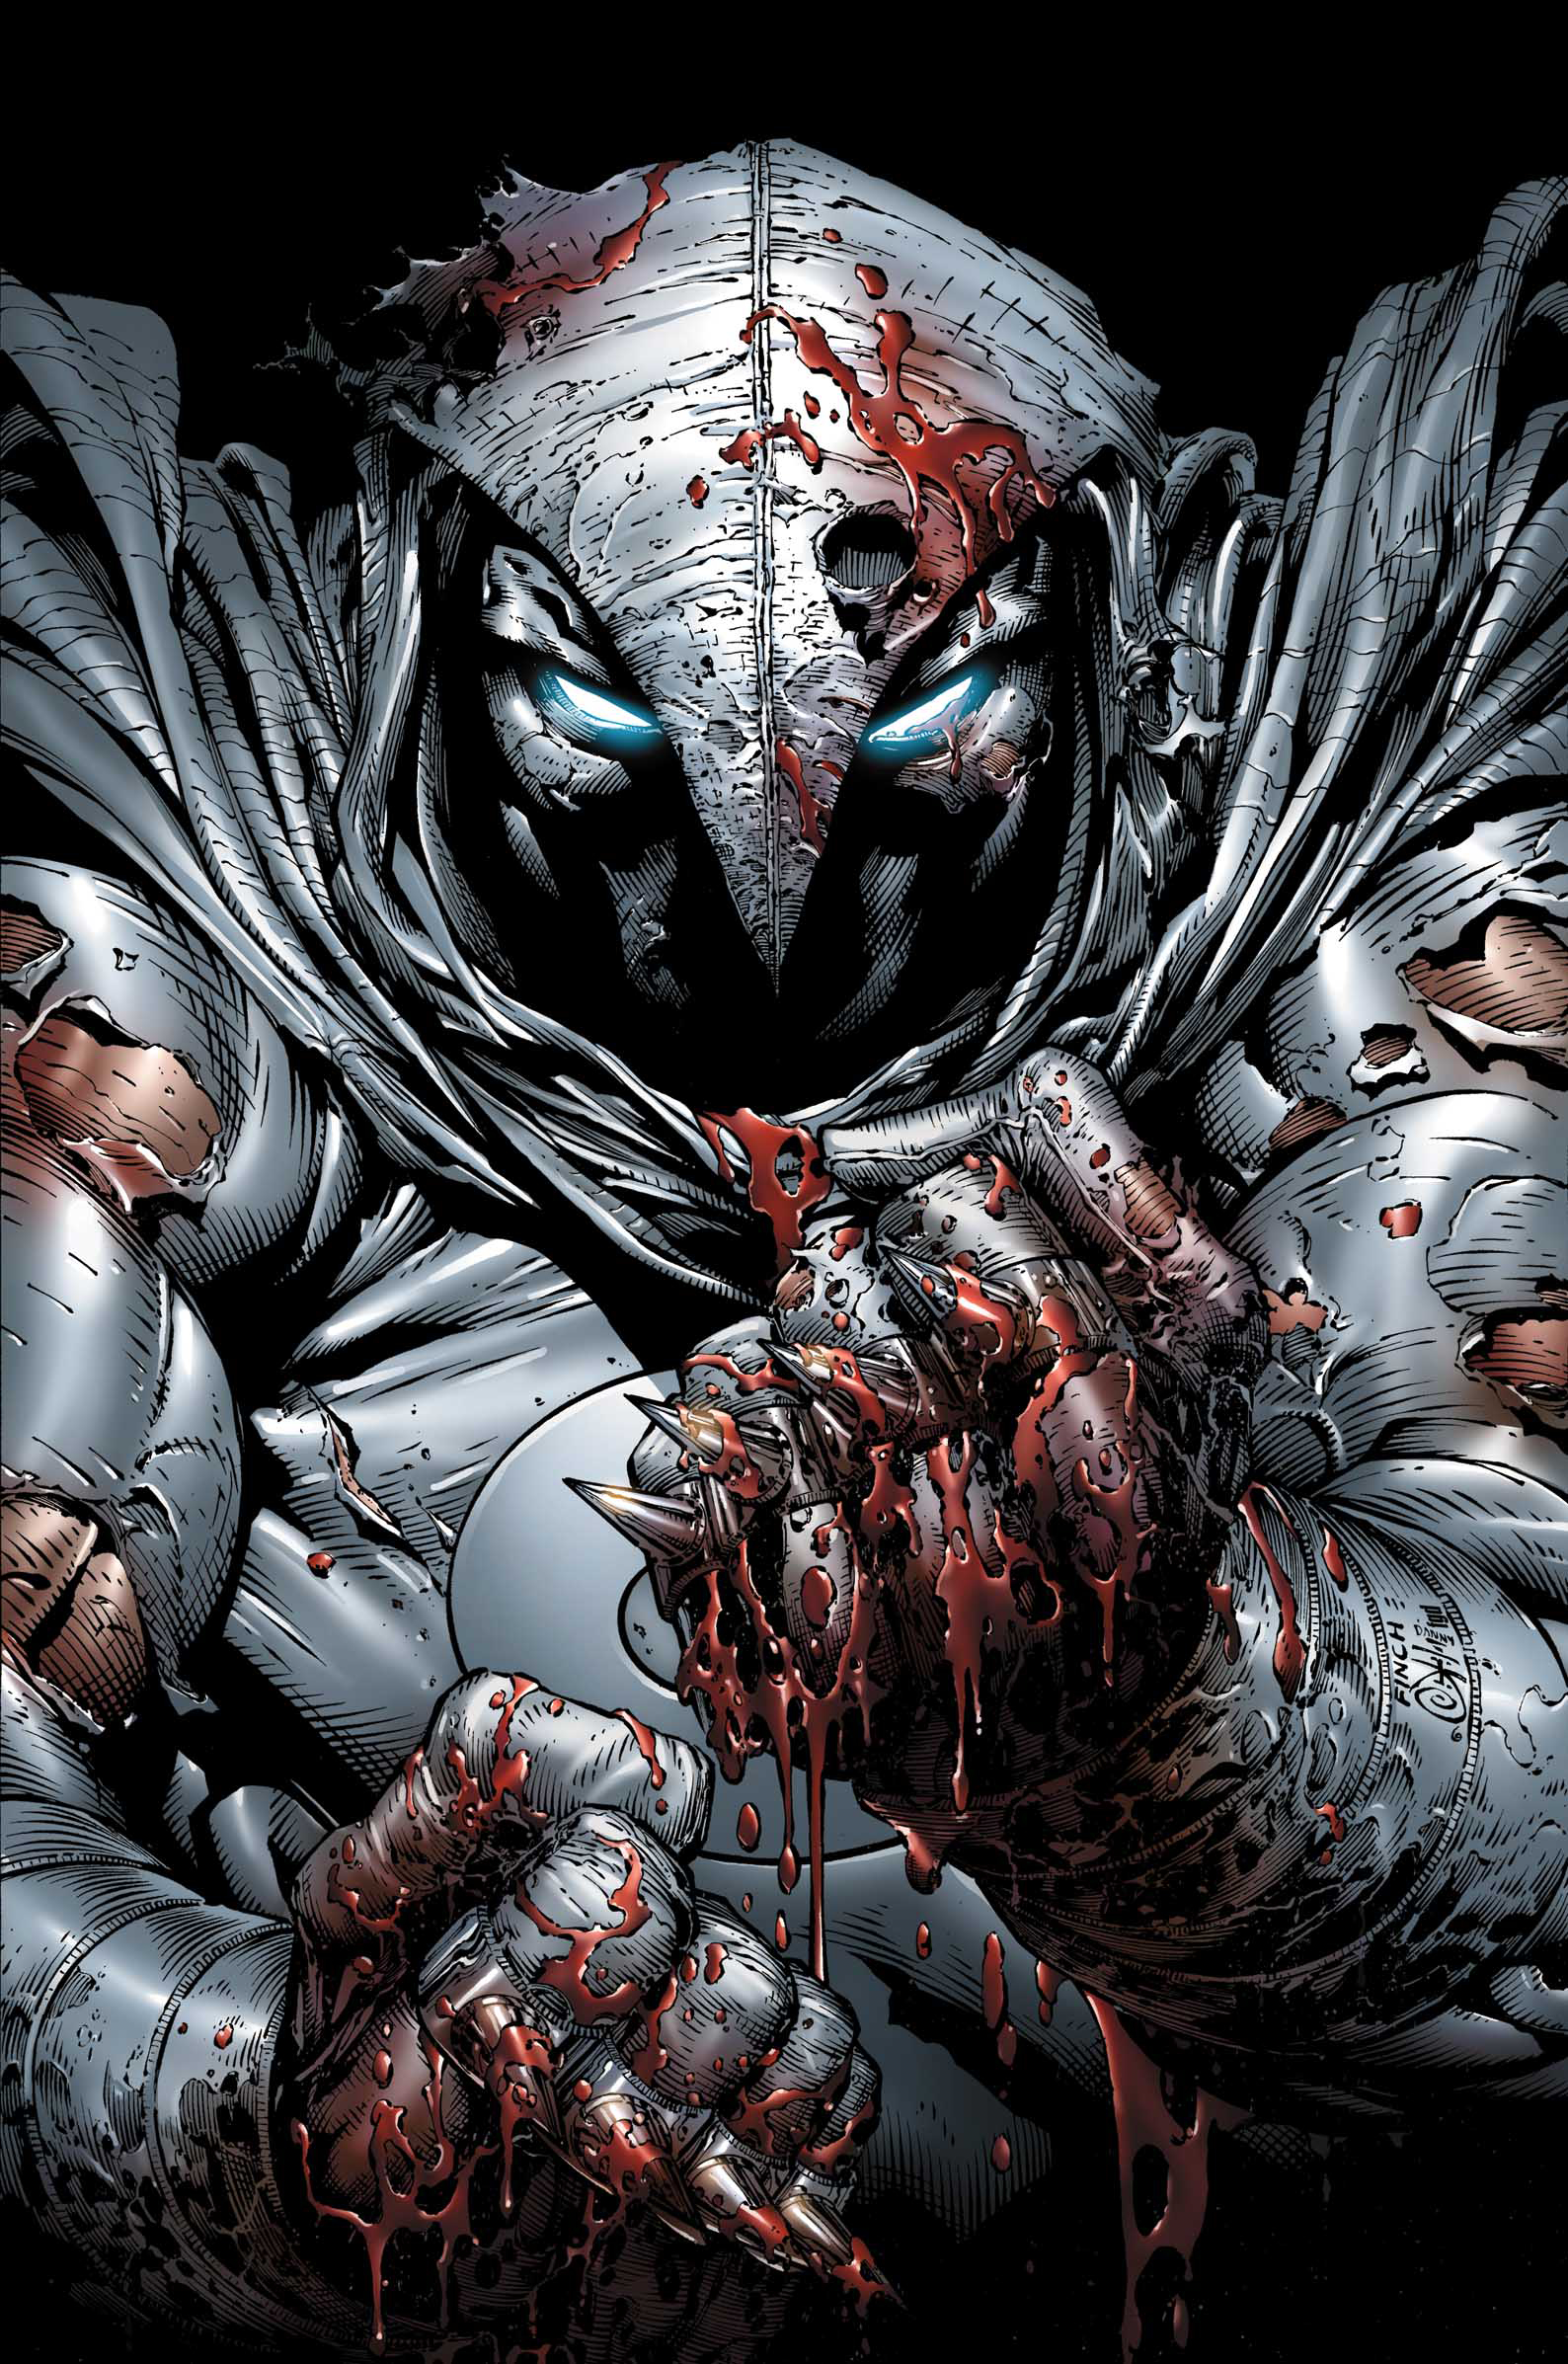 Moon Knight First Reviews: New Marvel Series Is a Dark, Bloody